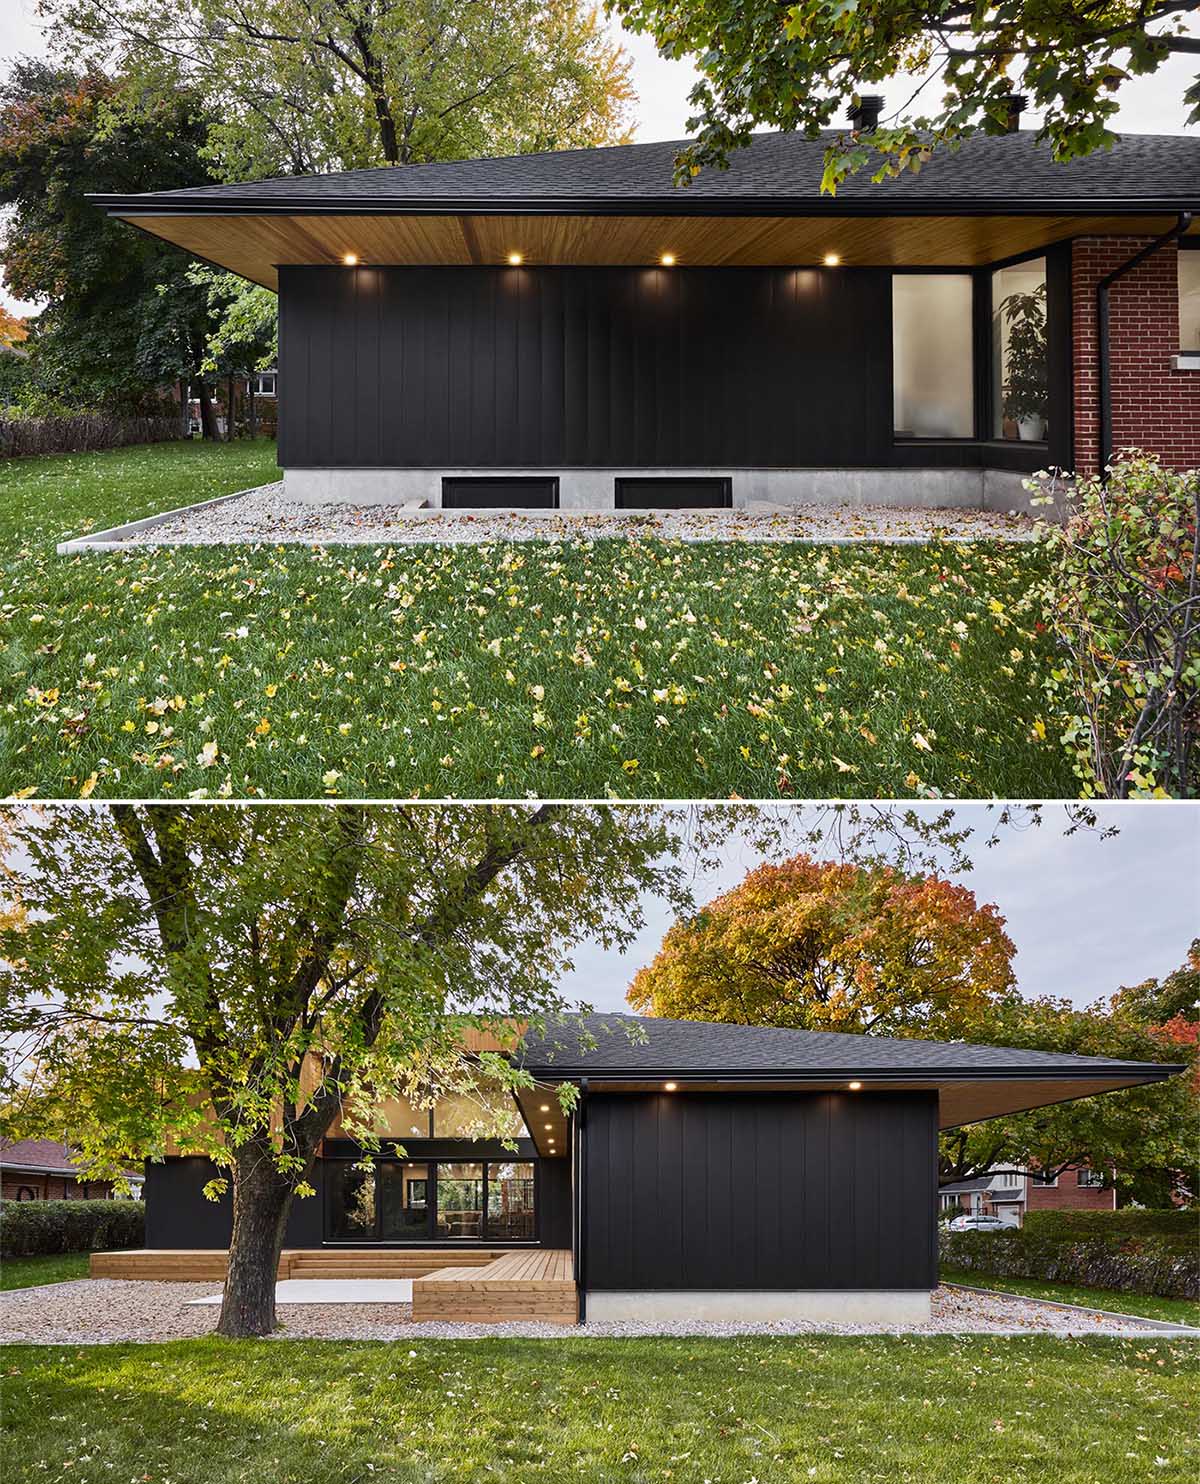 This remodeled bungalow, located on a corner lot and surrounded by mature trees, has a brick and stone facade with black accents.